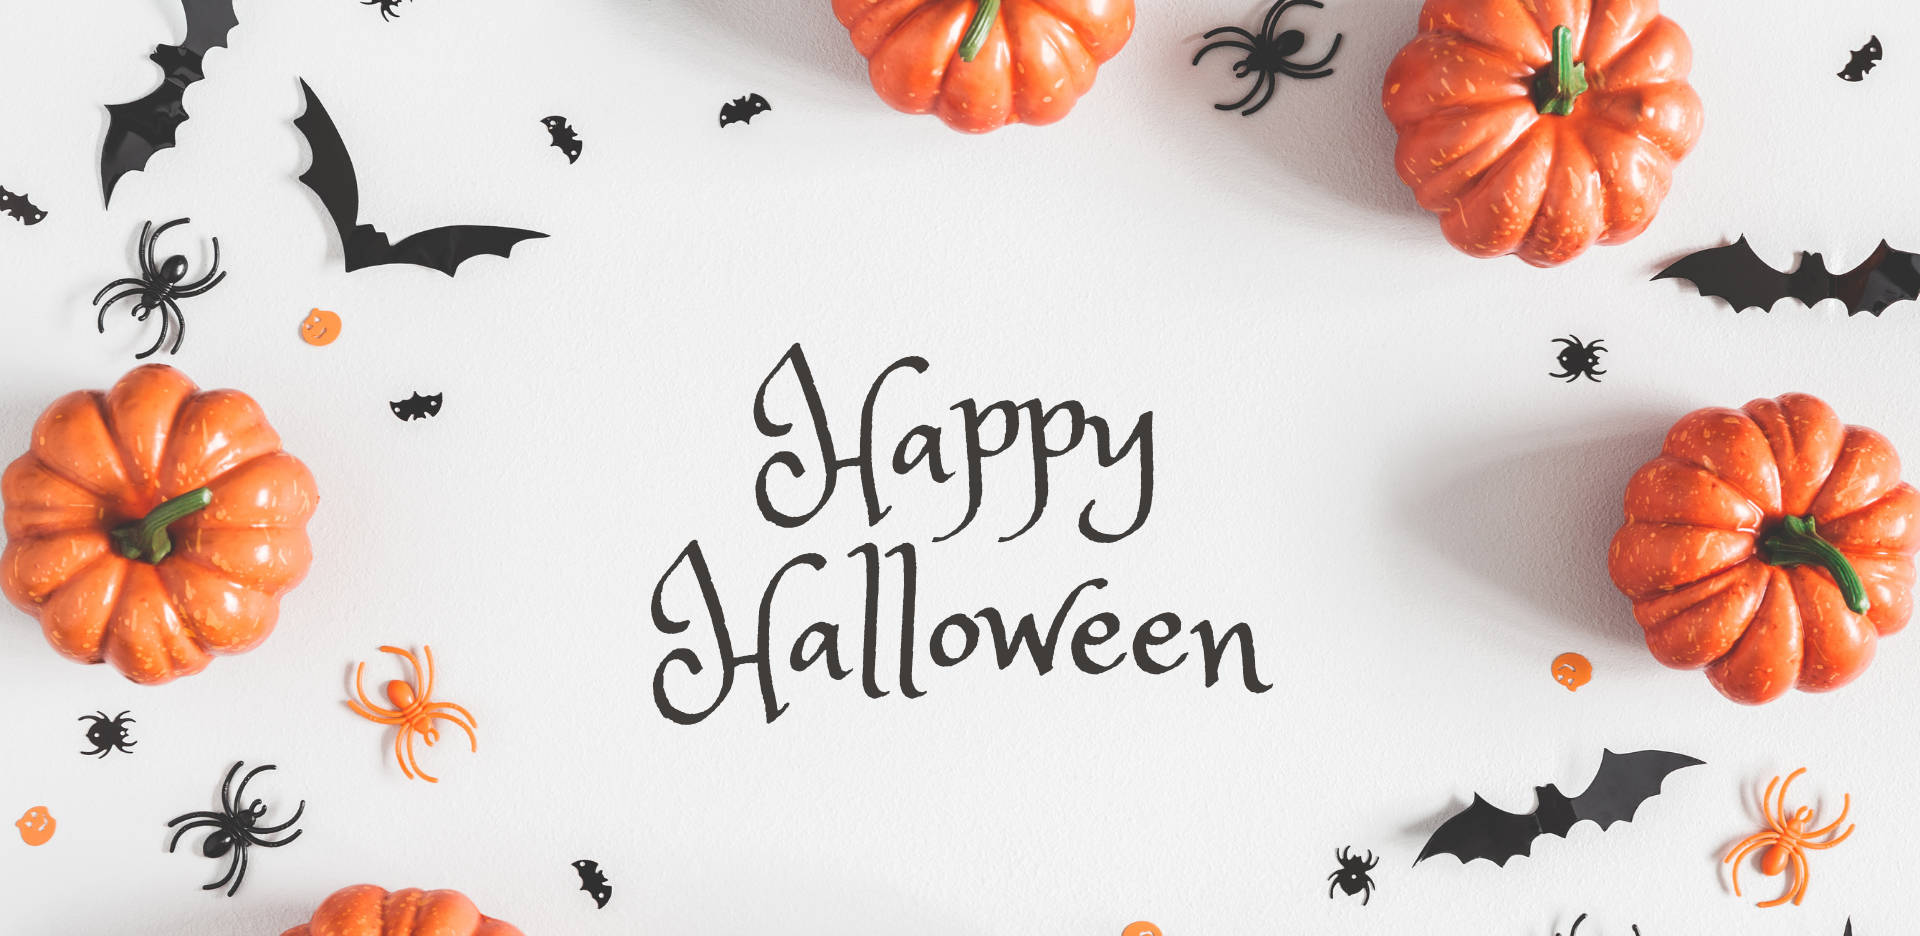 Happy Halloween With Pumpkins And Bats On A White Background Wallpaper